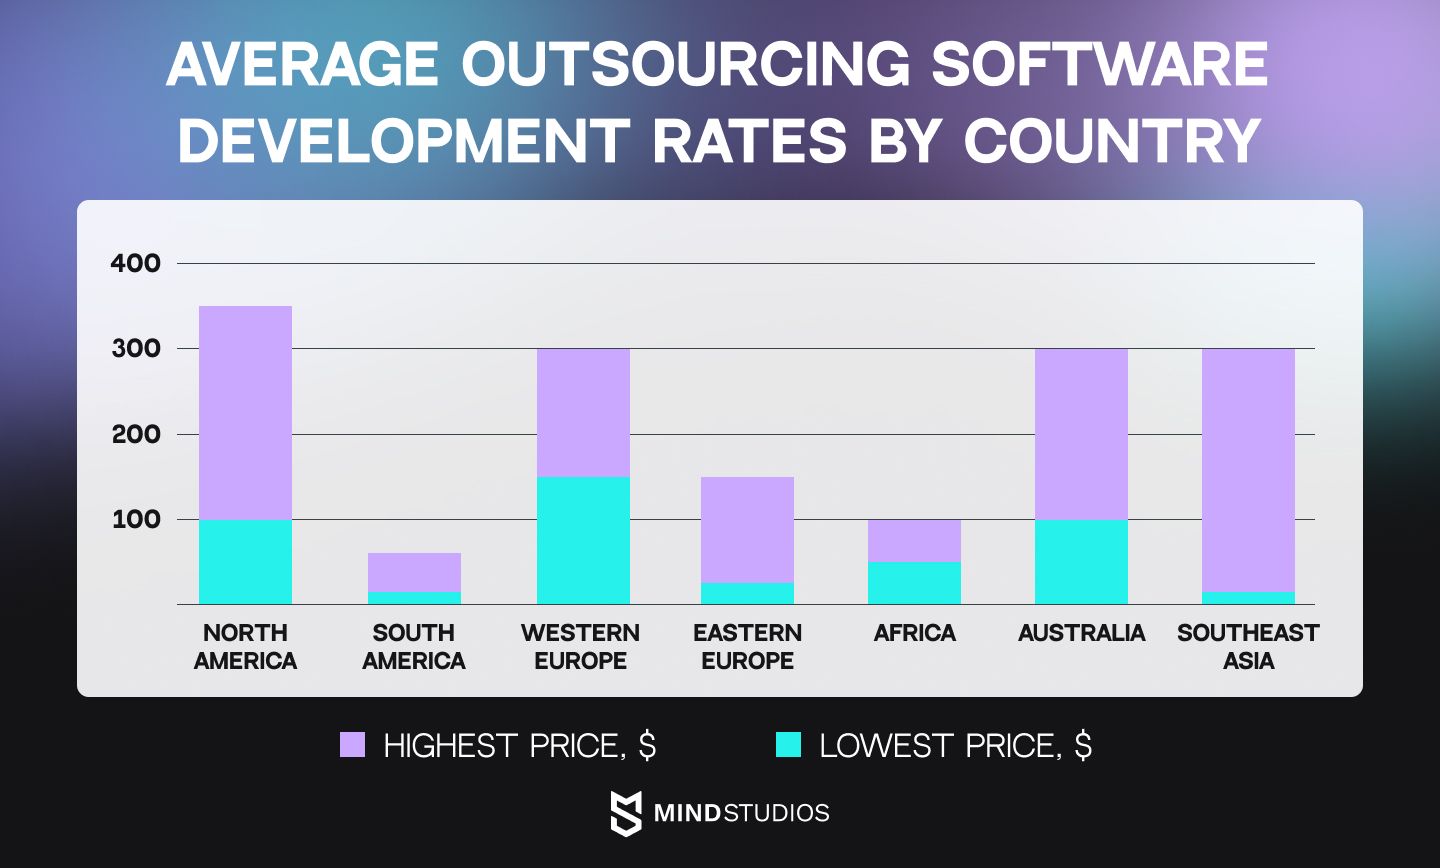 Average outsourcing software development rates by country